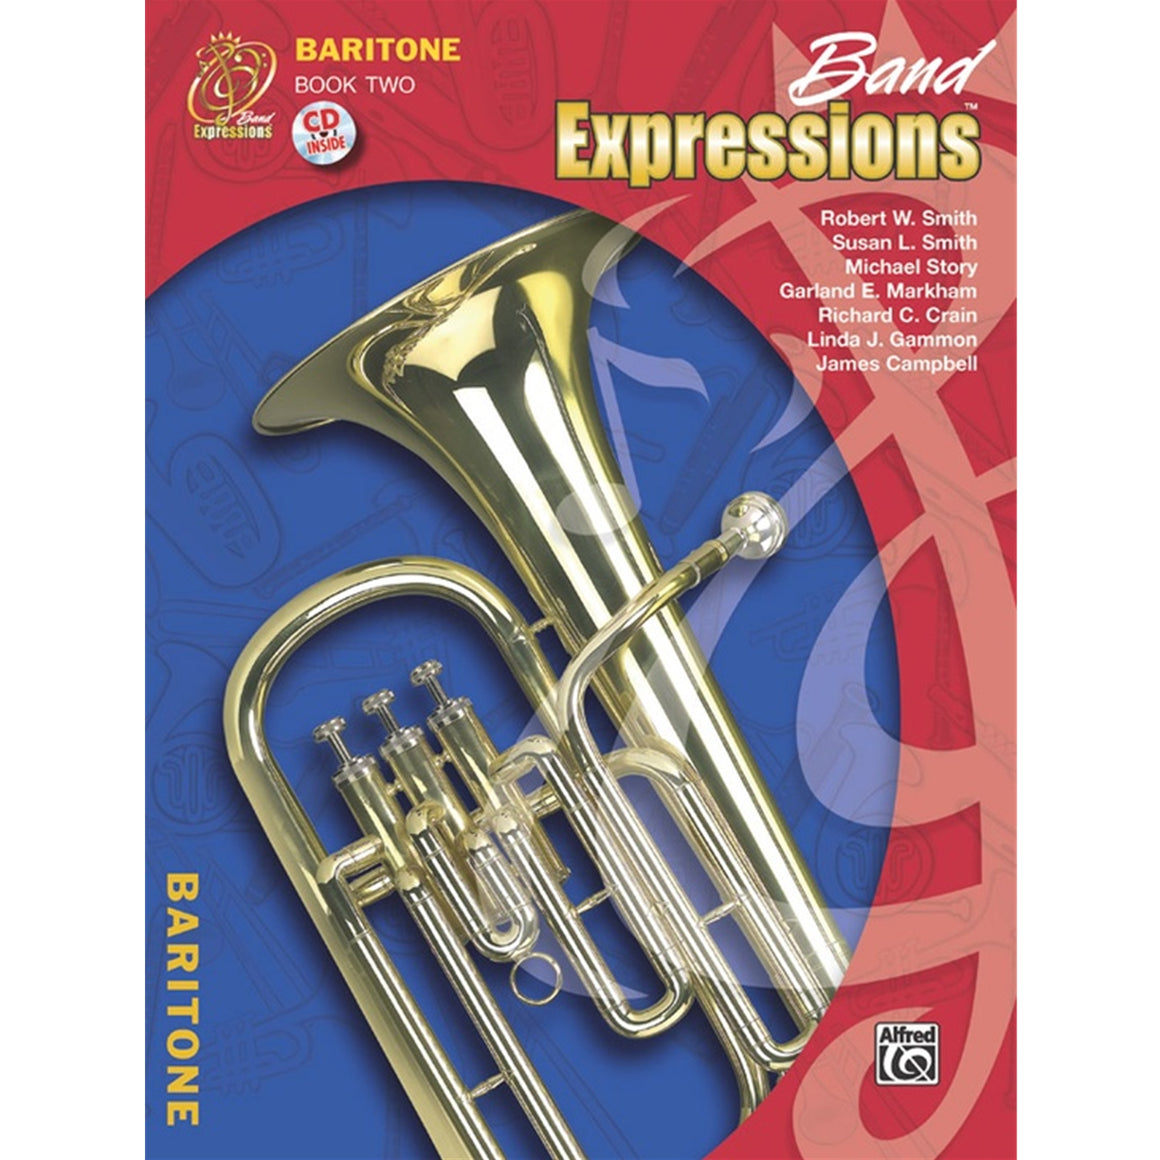 ALFRED 00EMCB2014CD Band Expressions , Book Two: Student Edition [Baritone B.C.]